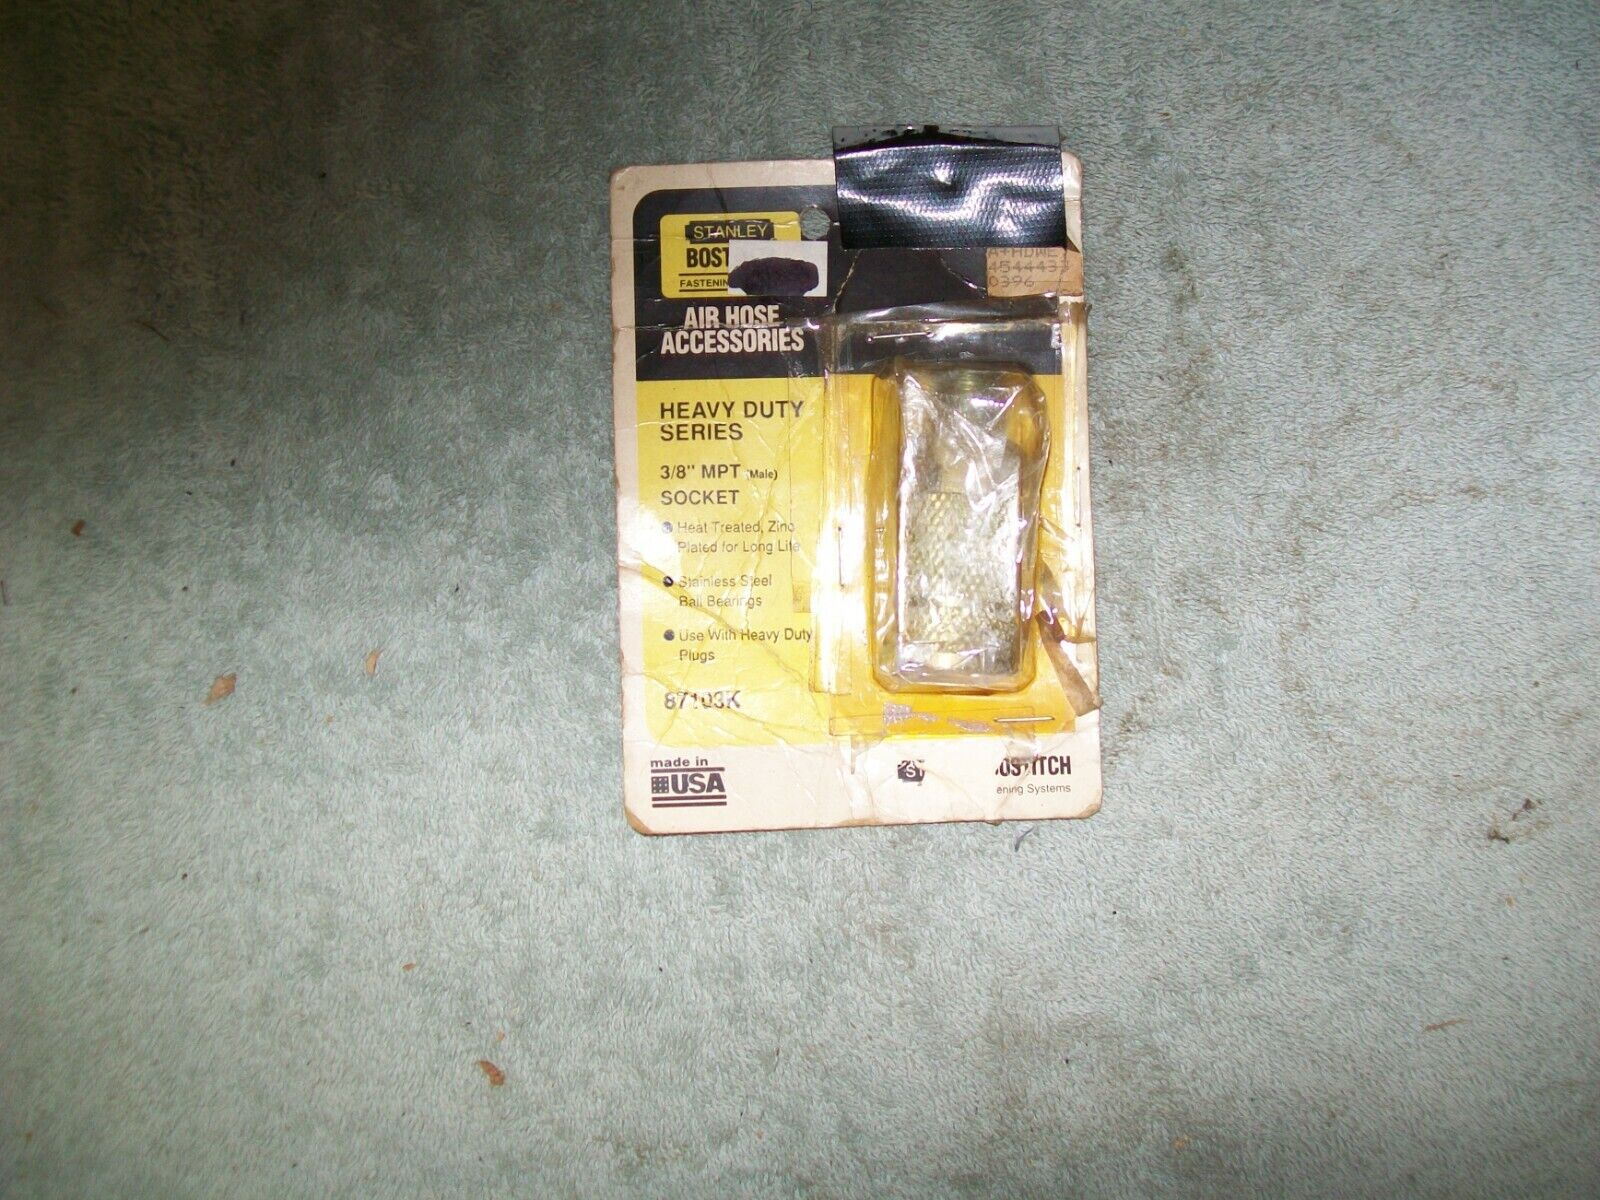 1 package of Stanley Bostitch part # 87103K male coupler 3/8 MPT